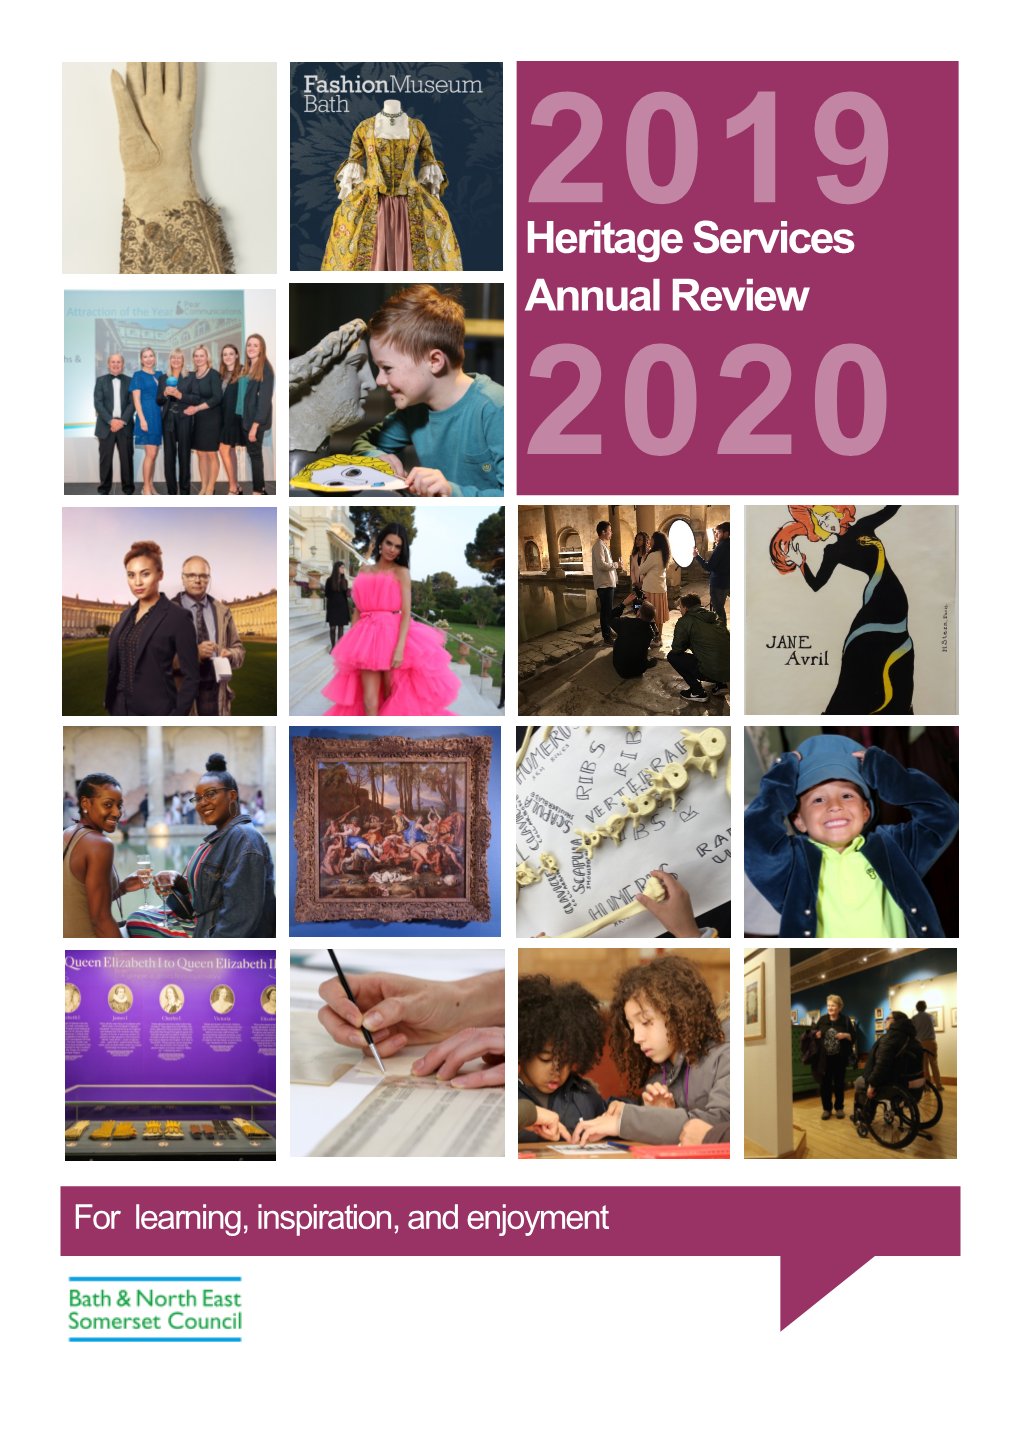 Heritage Services Annual Review 2020